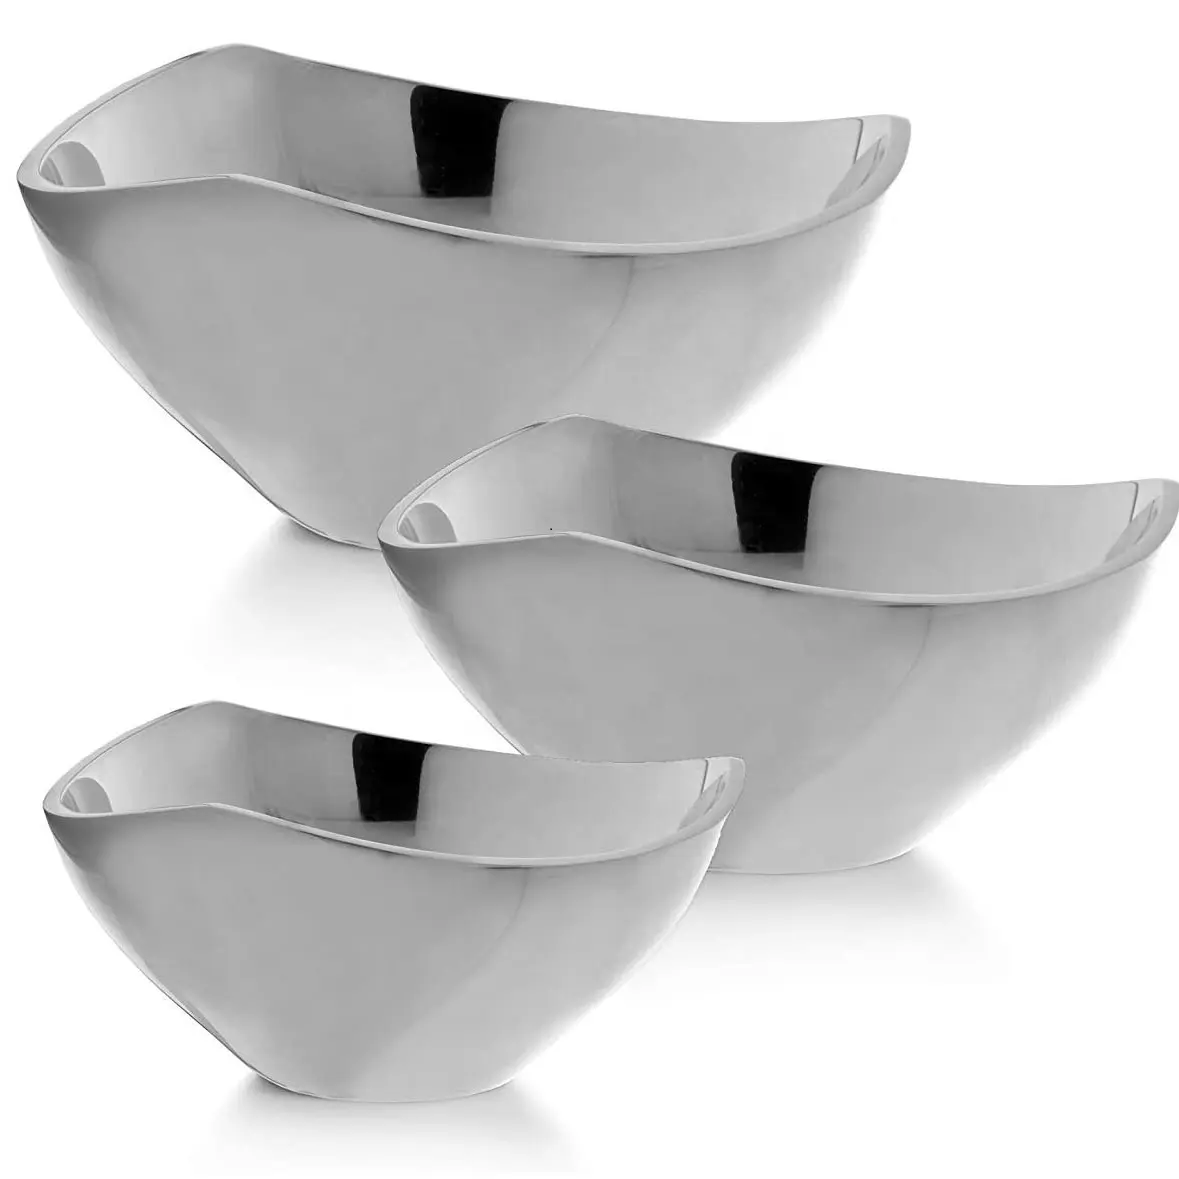 Attractive Designed Tabletop Decor Bowl With Smooth Edges Housewarming Bright Kitchenware Durable Steel Made Salad Serving Bowl